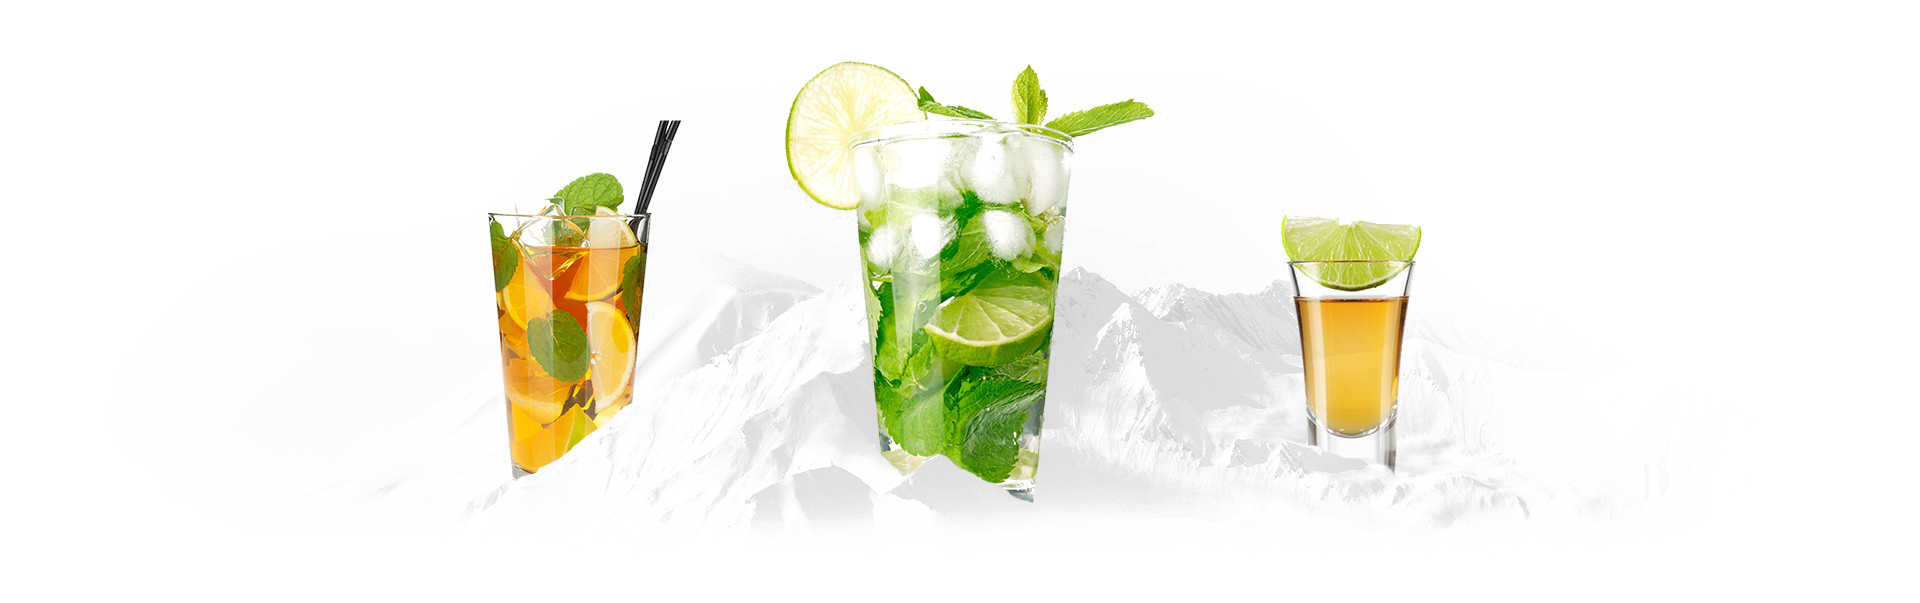 Ice Drink Picture Free HD Image PNG Image